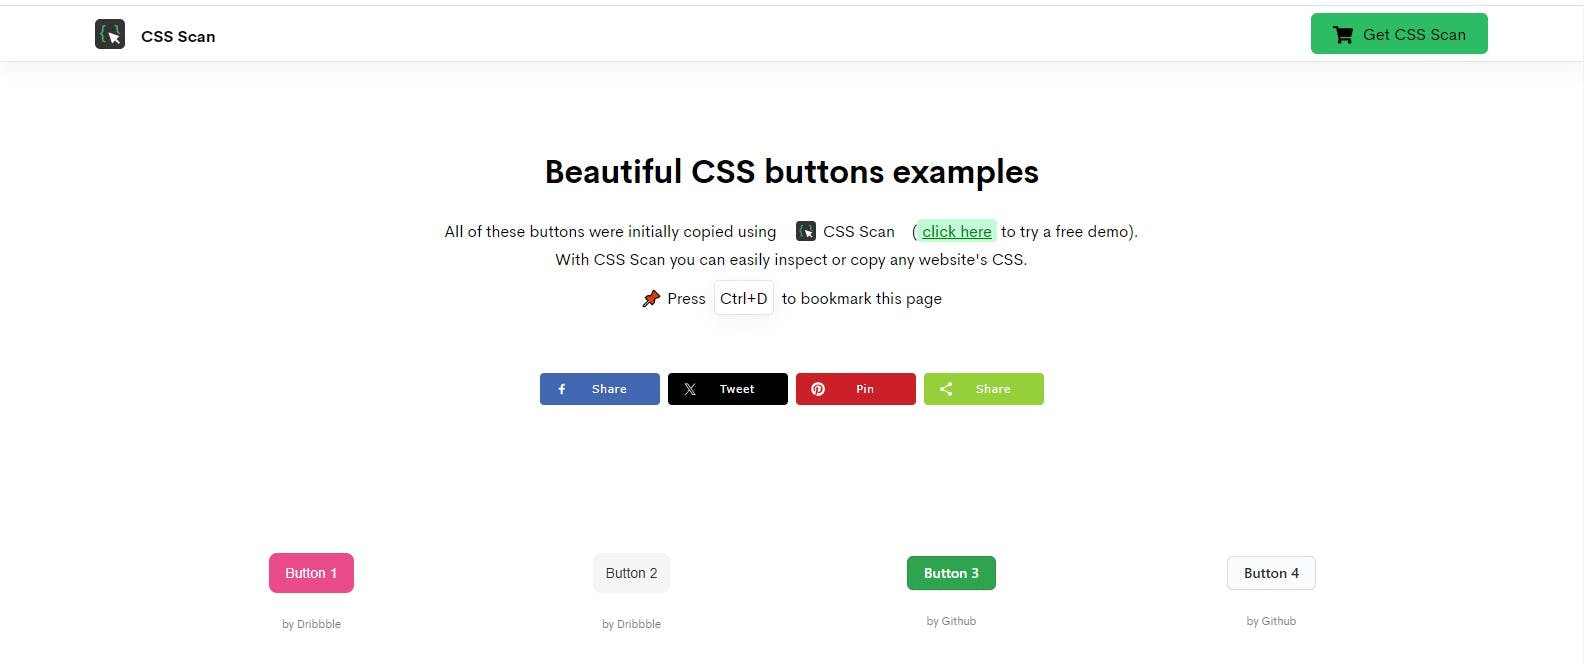 Beautiful CSS Buttons — A useful button collection from CssScan